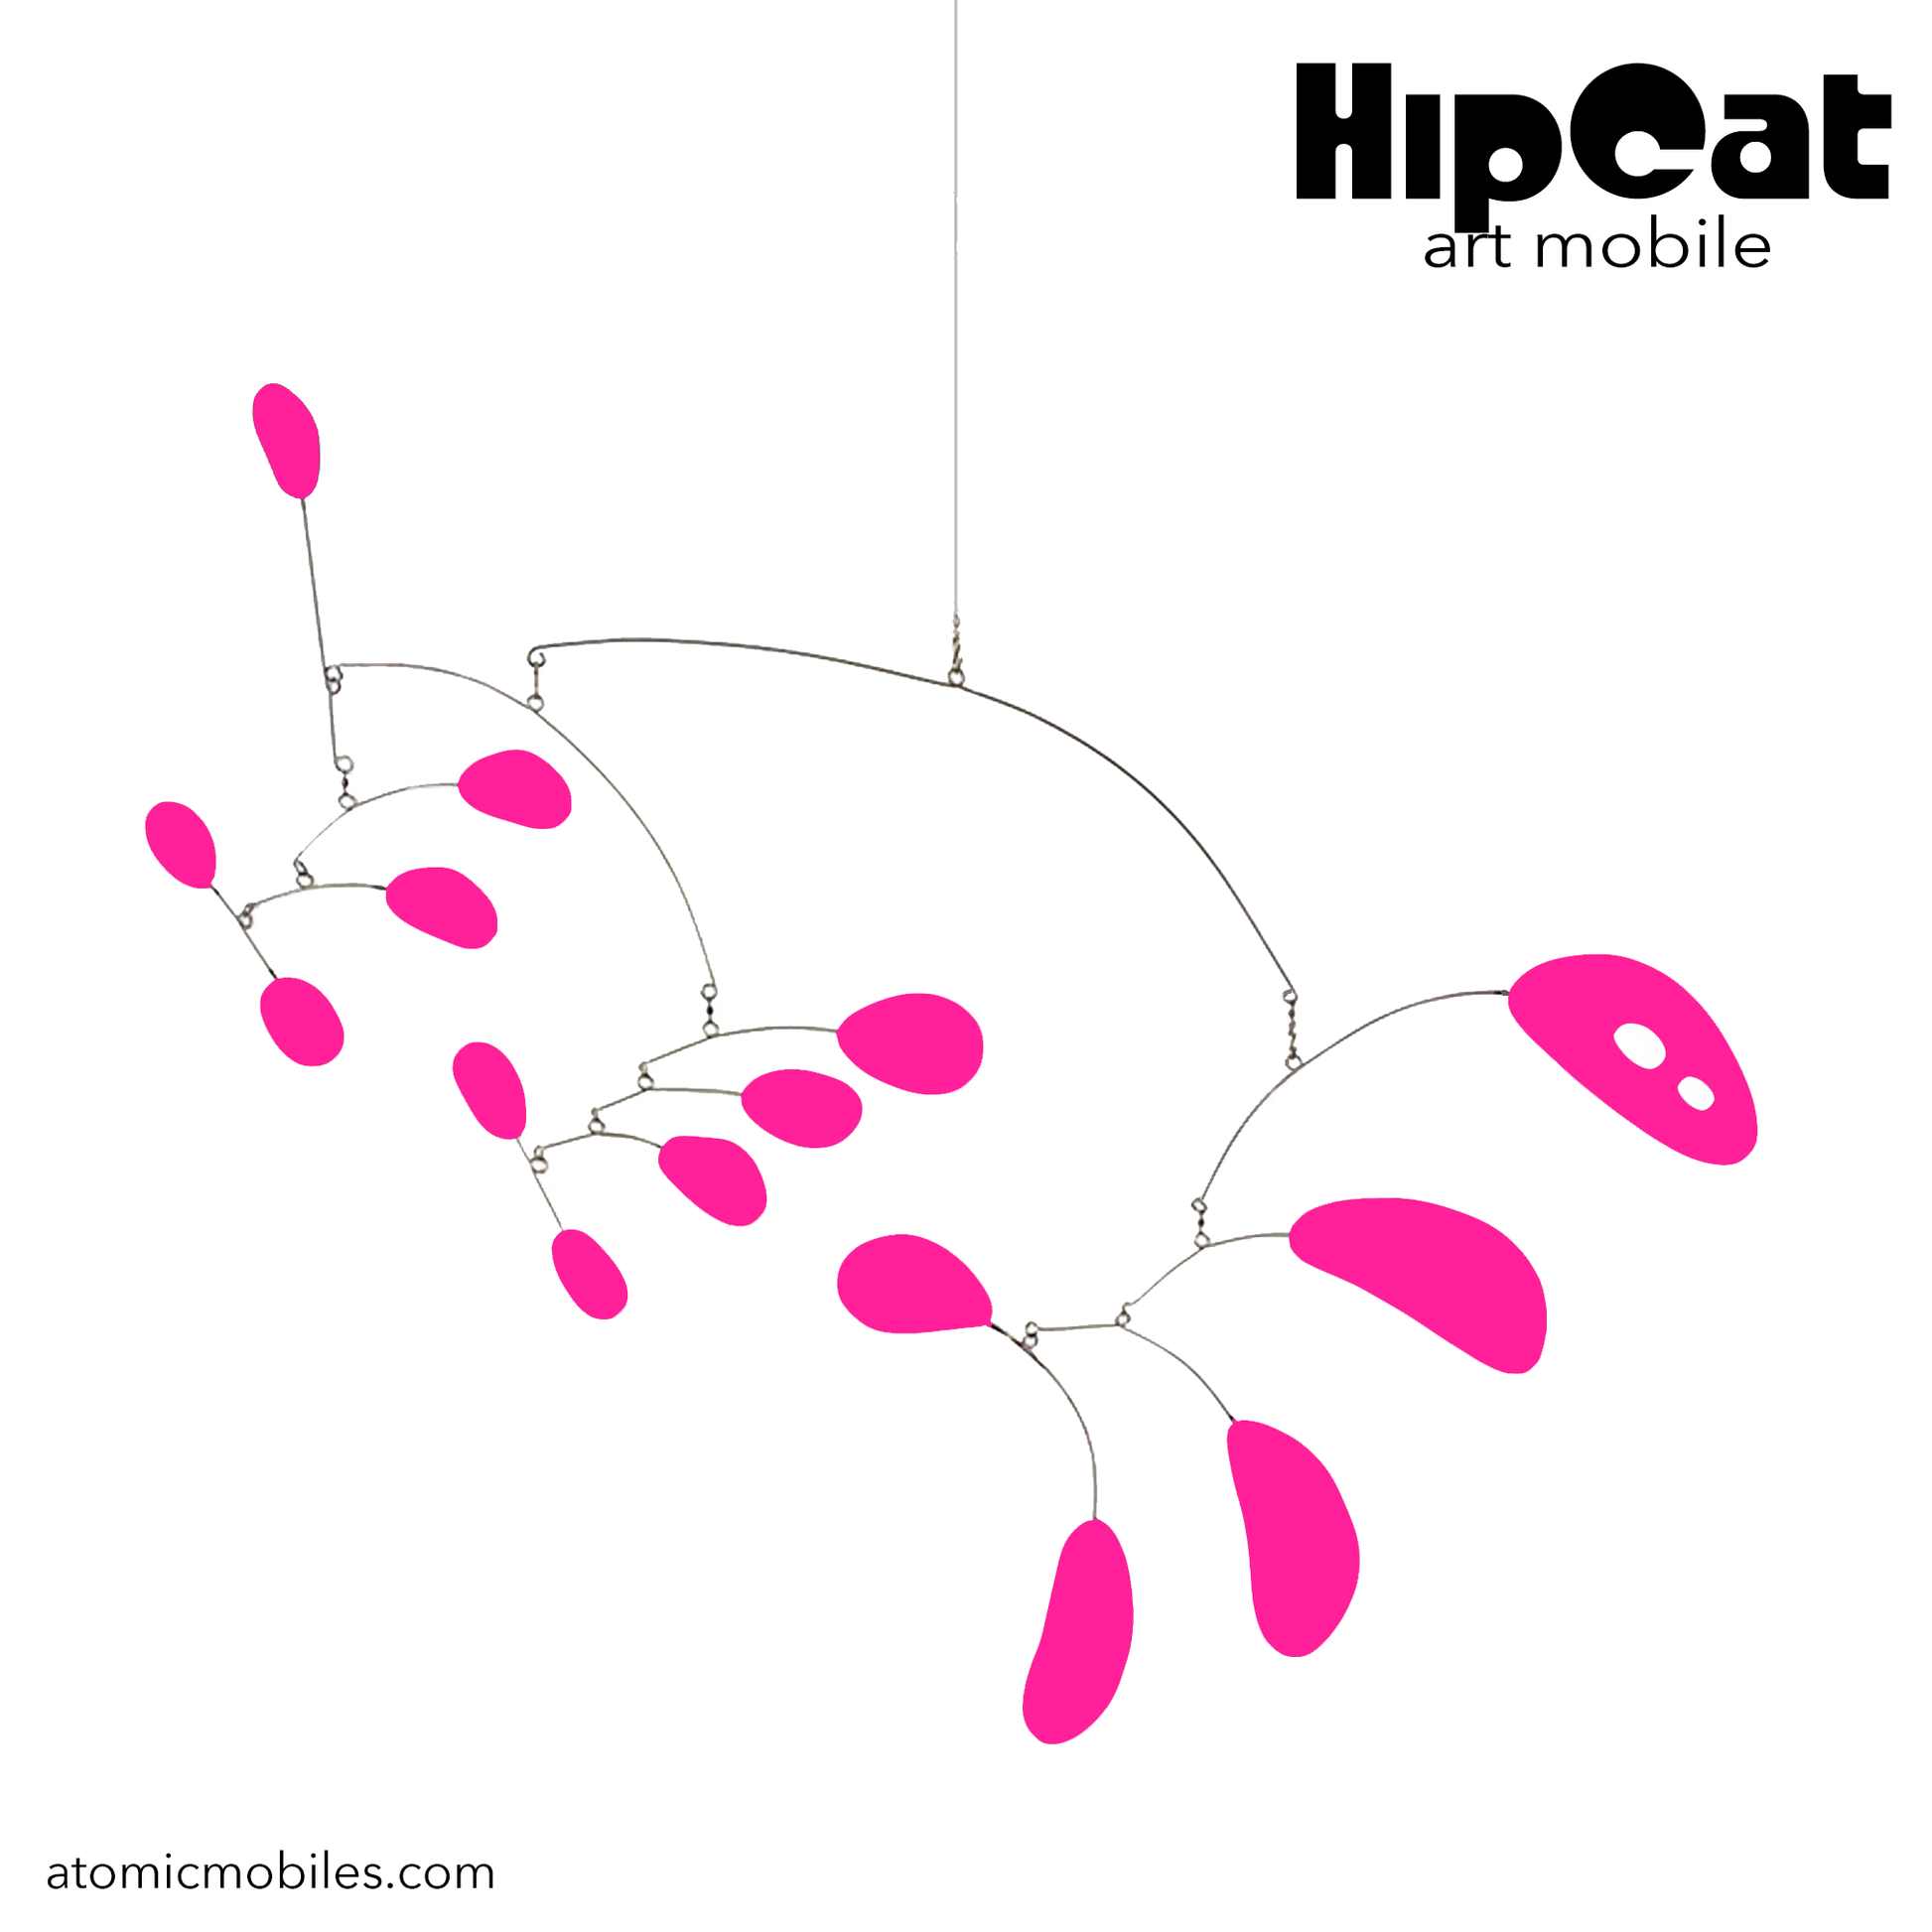 HipCat kinetic art mobile in Intense Hot Barbie Dream House Pink - hanging art mobile in MOD mid century modern style for your Barbiecore home decor by AtomicMobiles.com